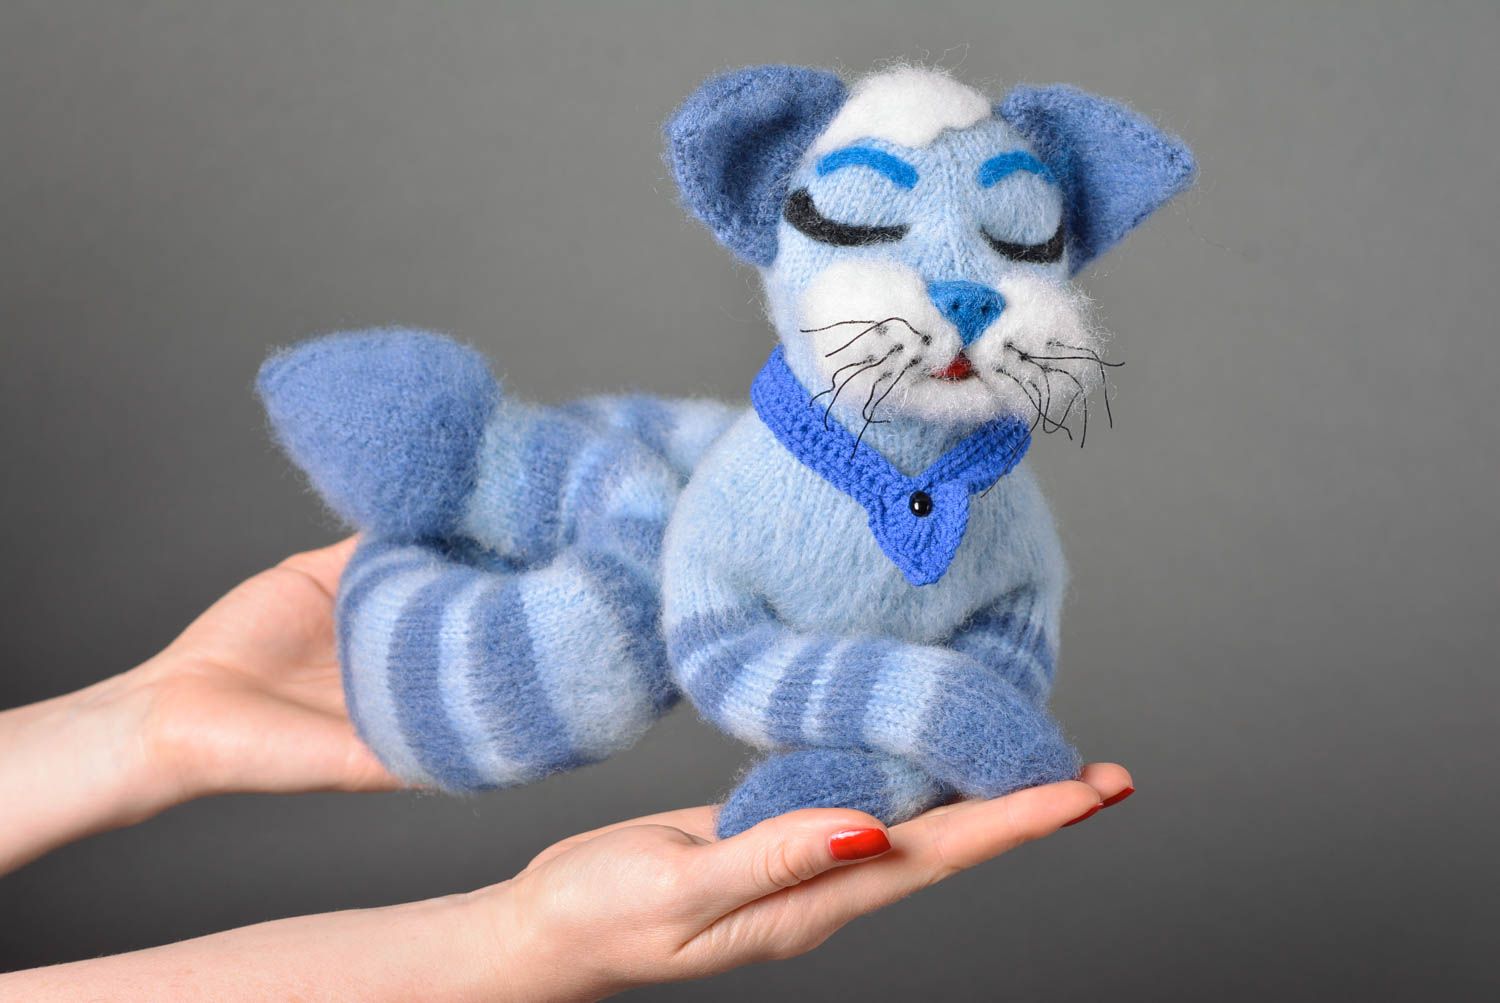 Handmade knitted cat toy stuffed toy nursery decor present for children photo 3